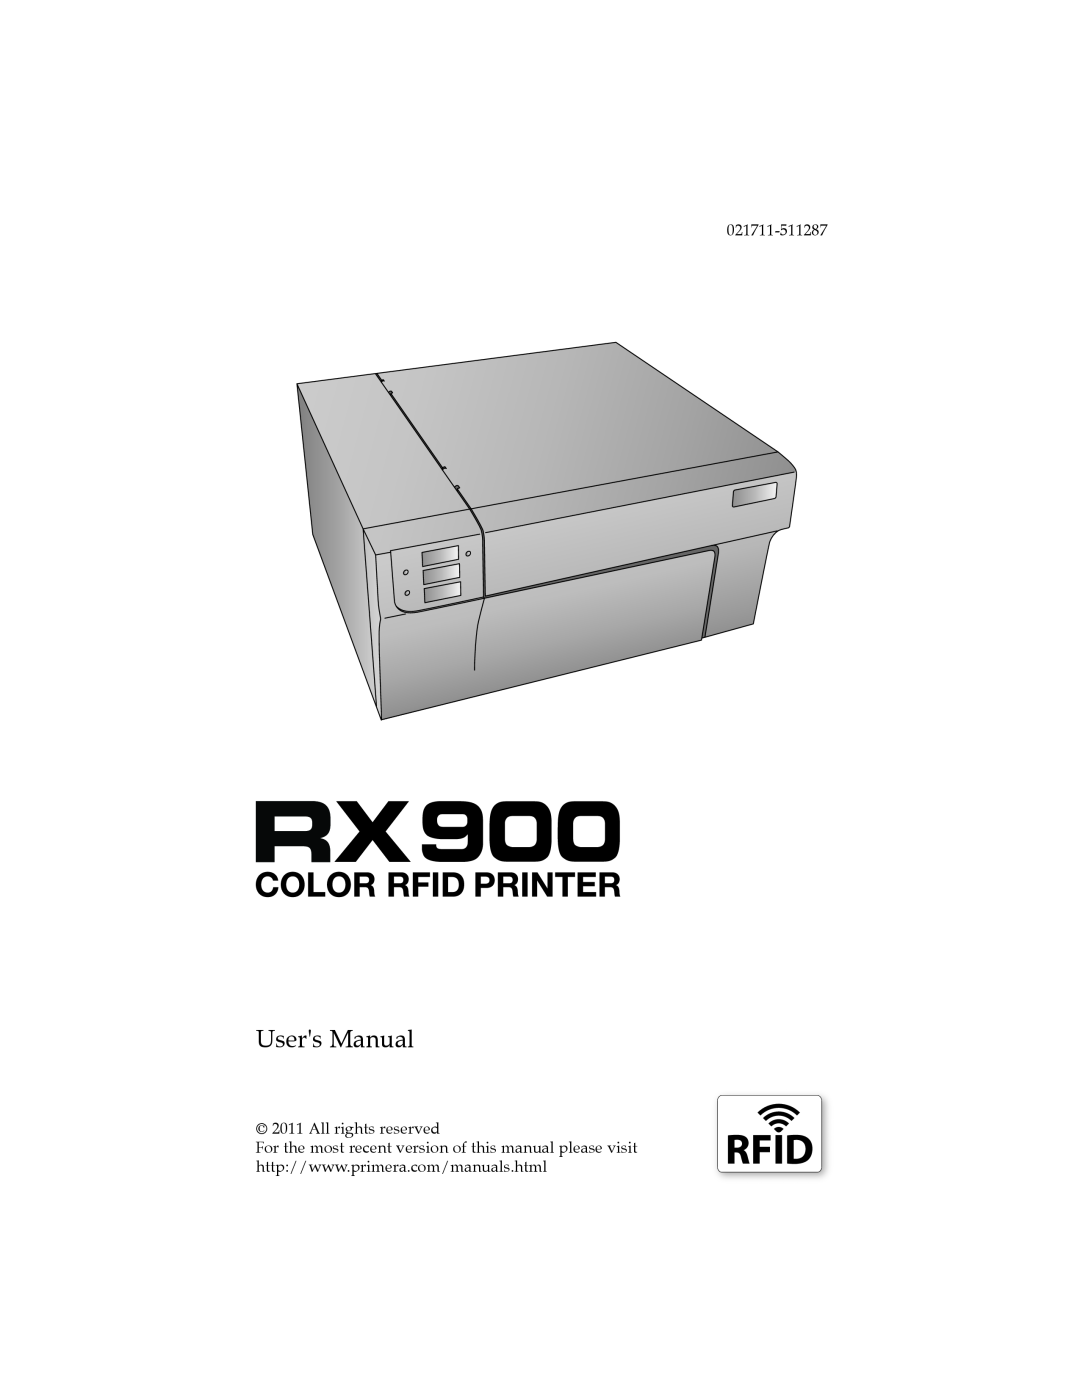 Primera Technology RX900 user manual Users Manual, 021711-511287, All rights reserved 